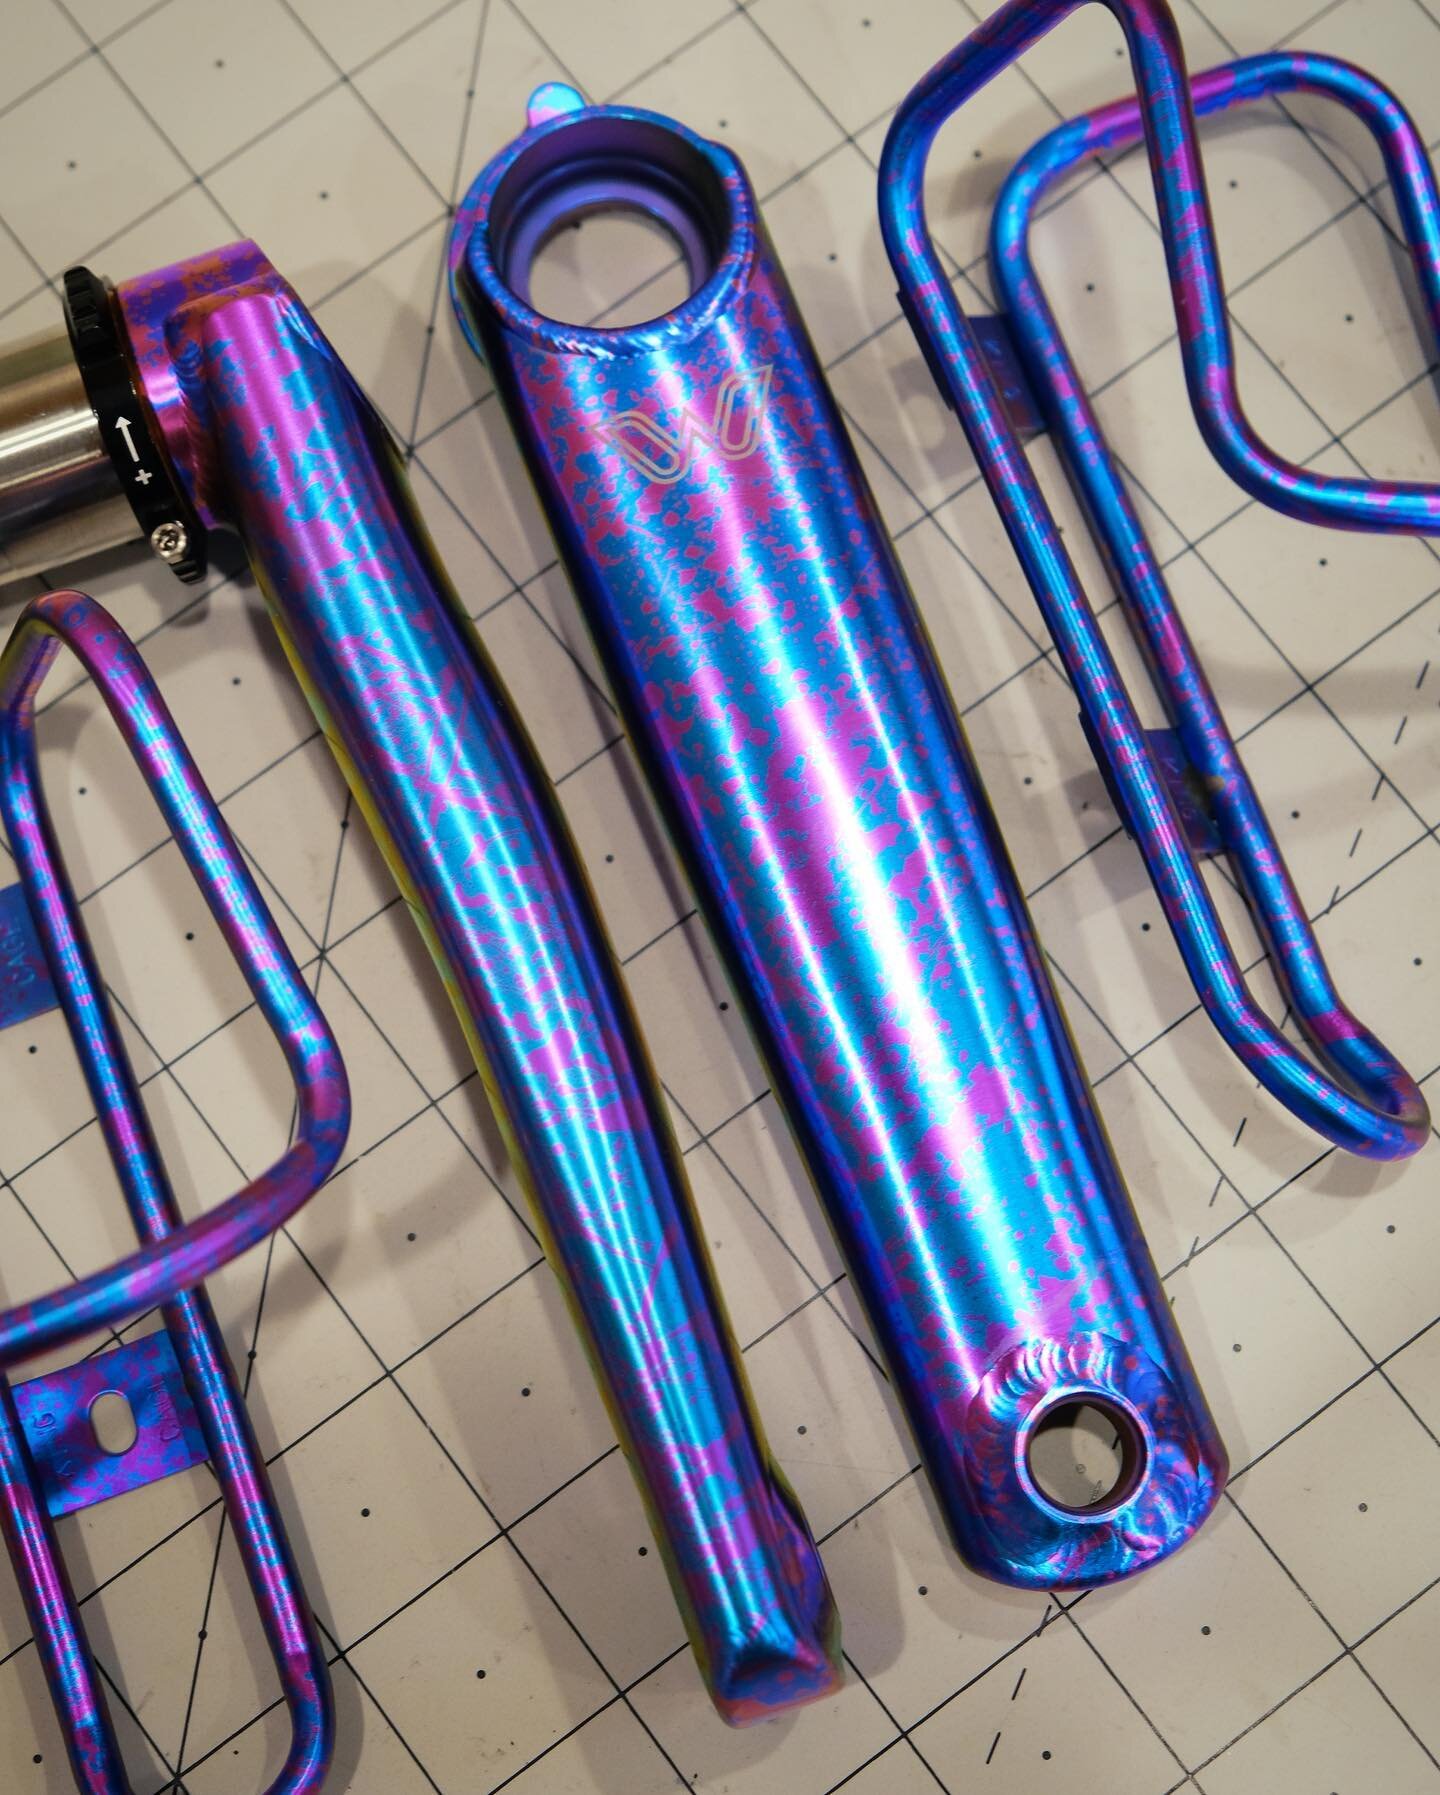 A custom set of eeWings and King Cages for Julieth in a turquoise and violet splatter ano.
.
.
.
#titaniumanodizing #eewings #kingcage #titanium #anodizing #noboringbikes #custombicycle #durango #colorado